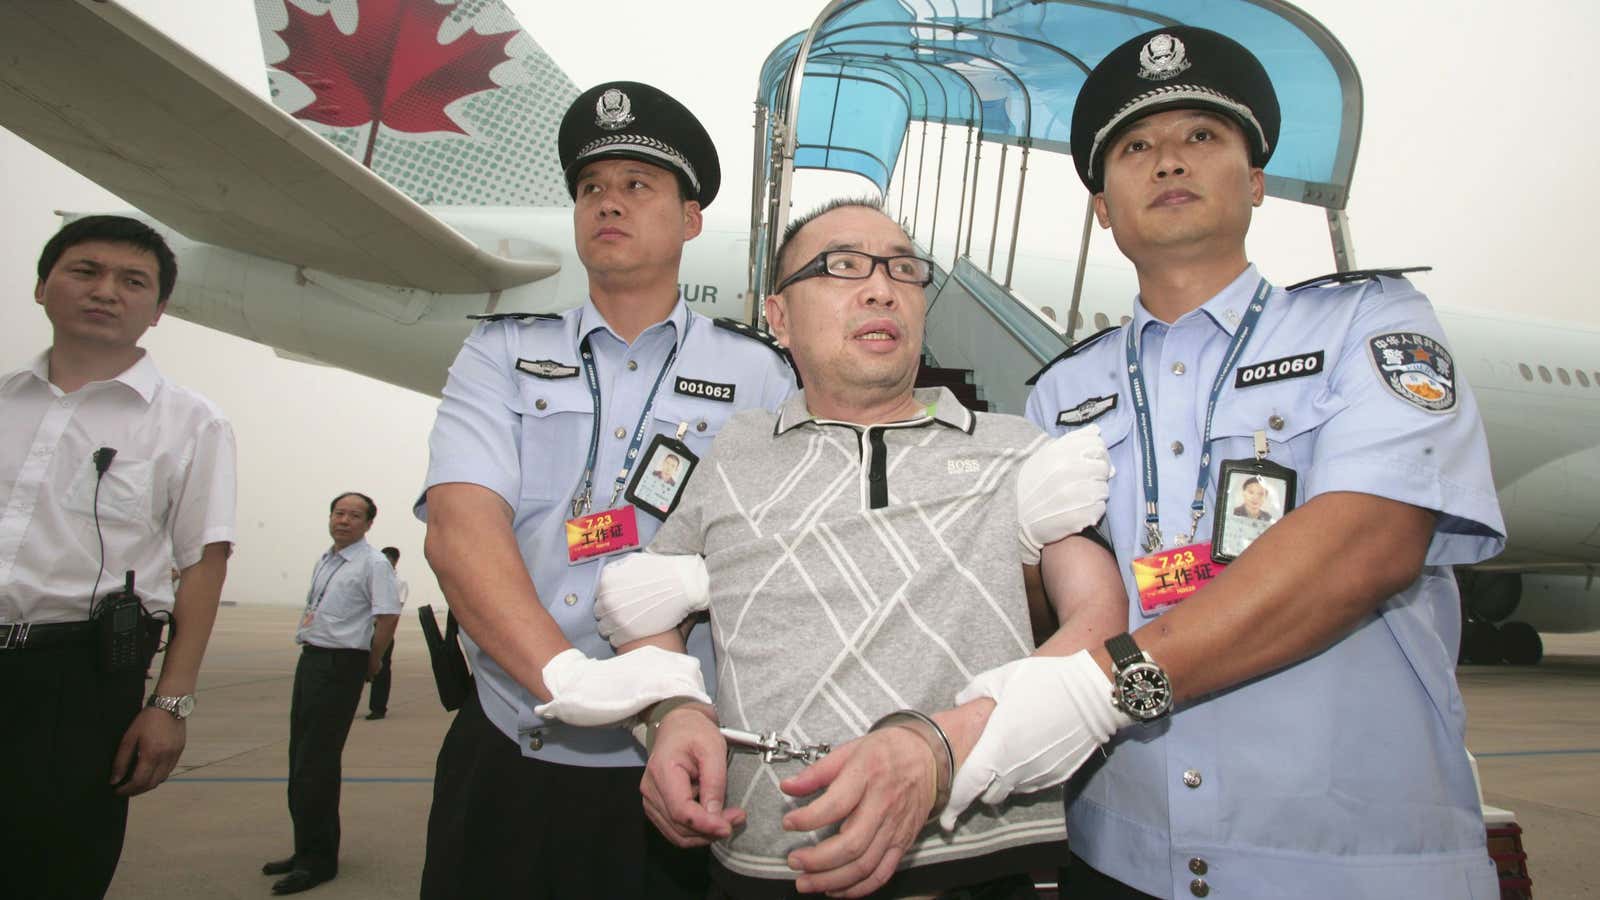 Lai Changxing, wanted for embezzlement and fraud, fought extradition in Canada for 12 years, before being returned to China where he was given life in prison.